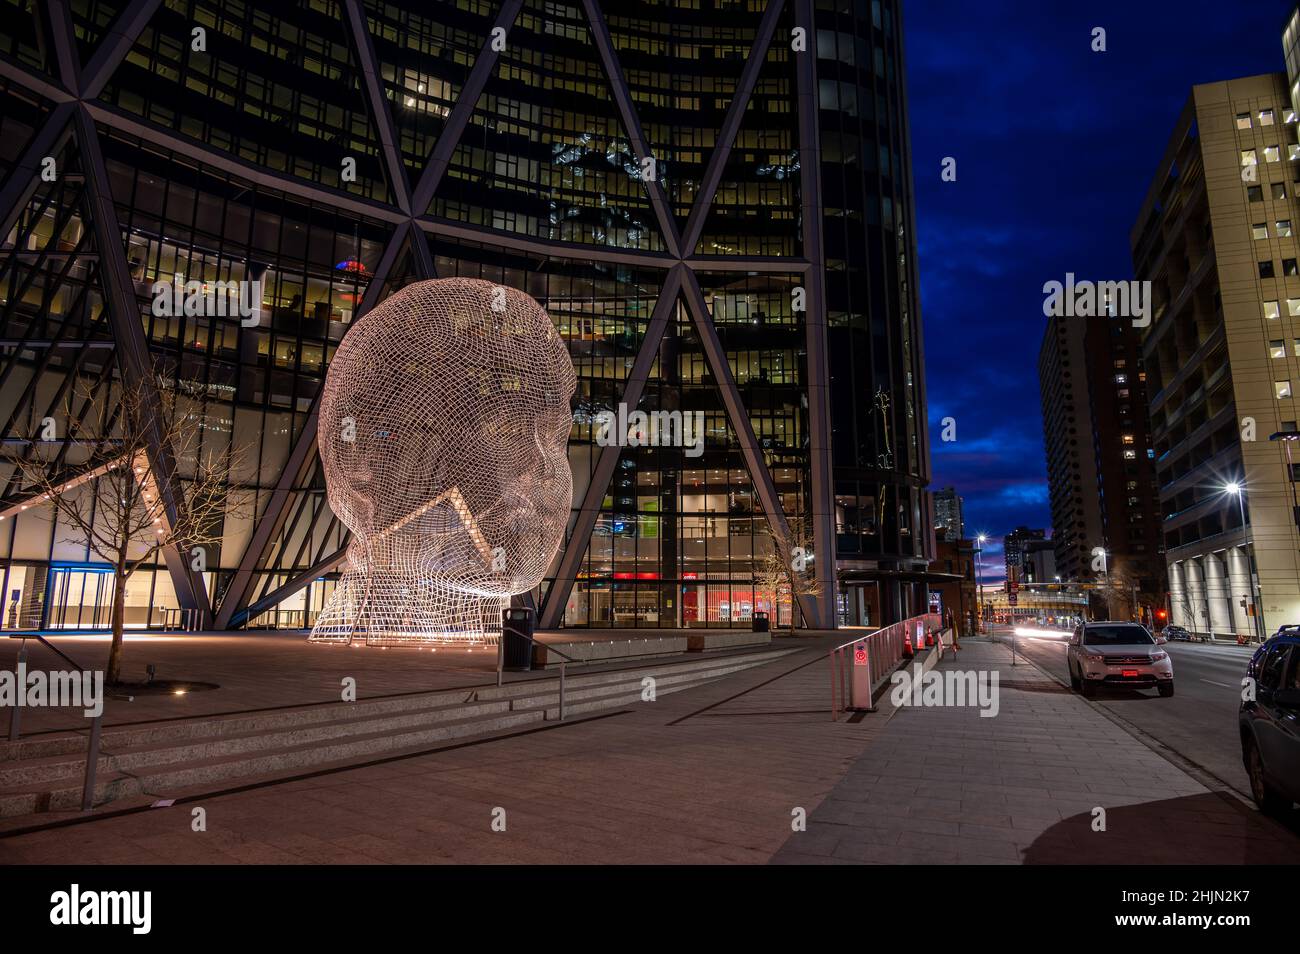 Calgary, Alberta - January 30, 2022: View of the Wonderland sculpture outside the Bow Tower in Calgary. Stock Photo